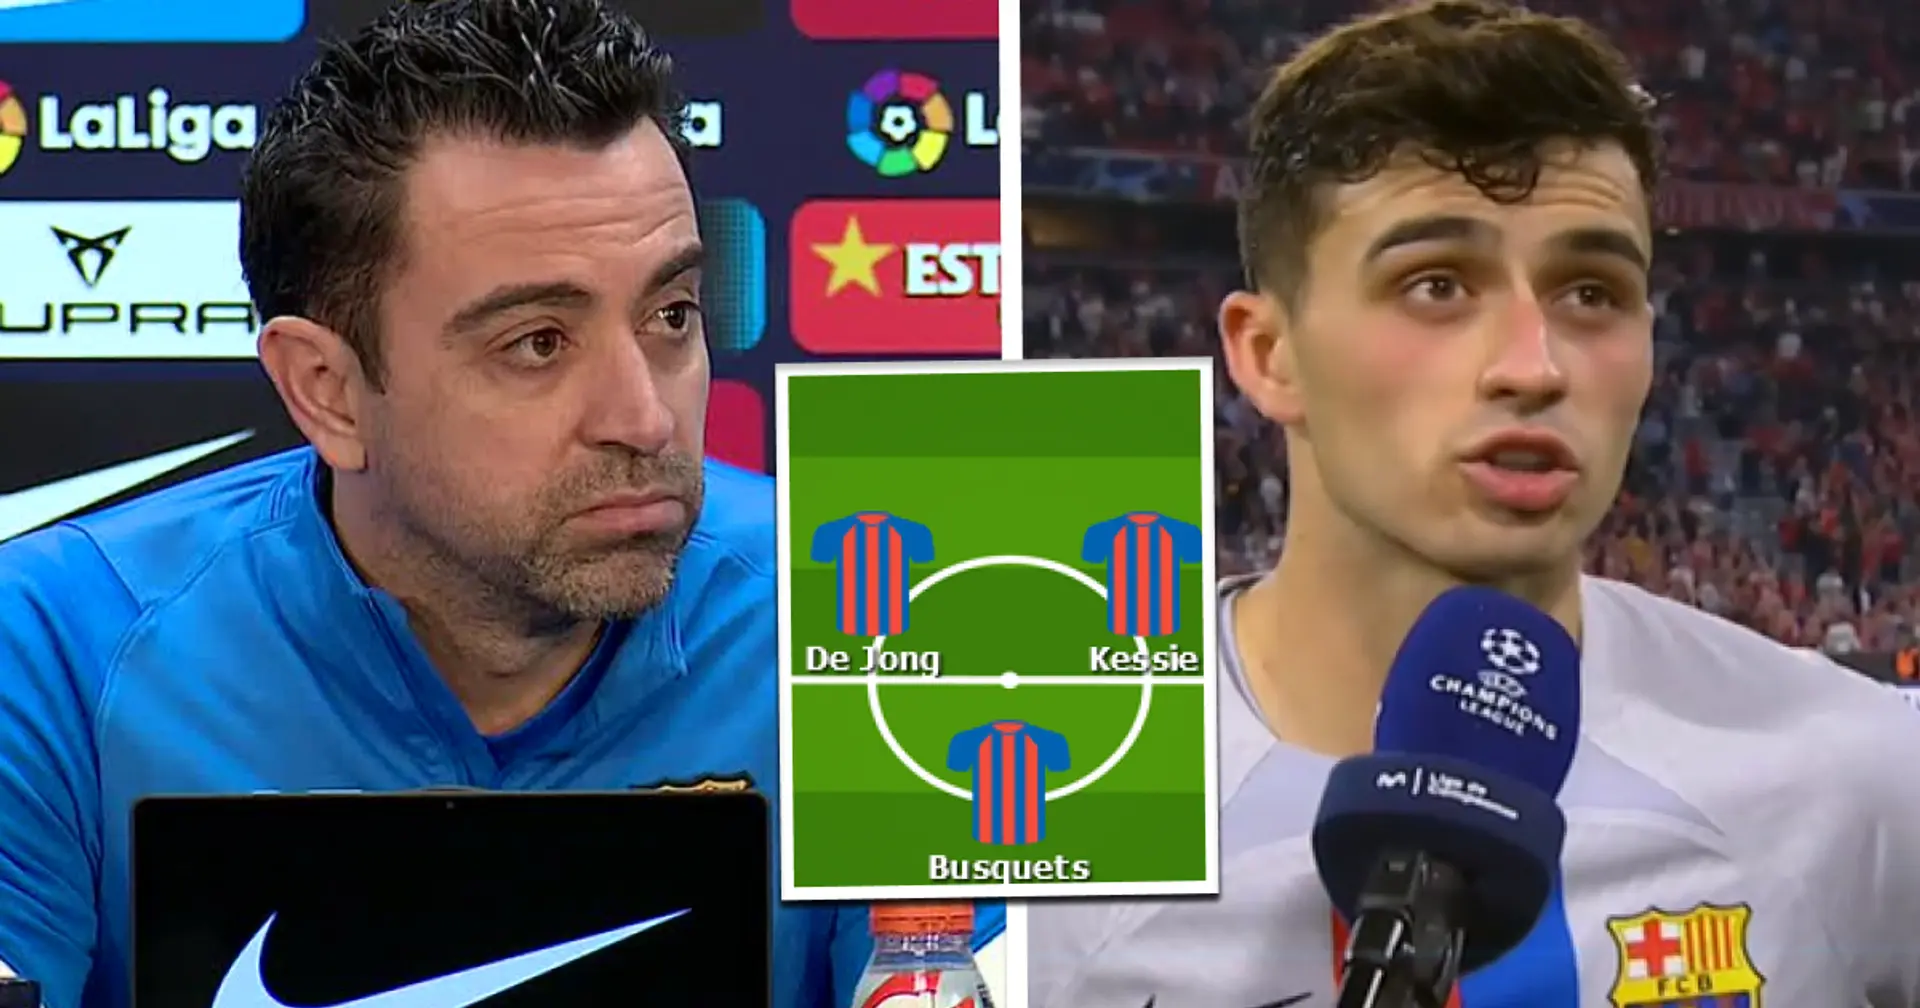 Xavi plans to use '4 midfielders' vs Bayern – shown in lineup